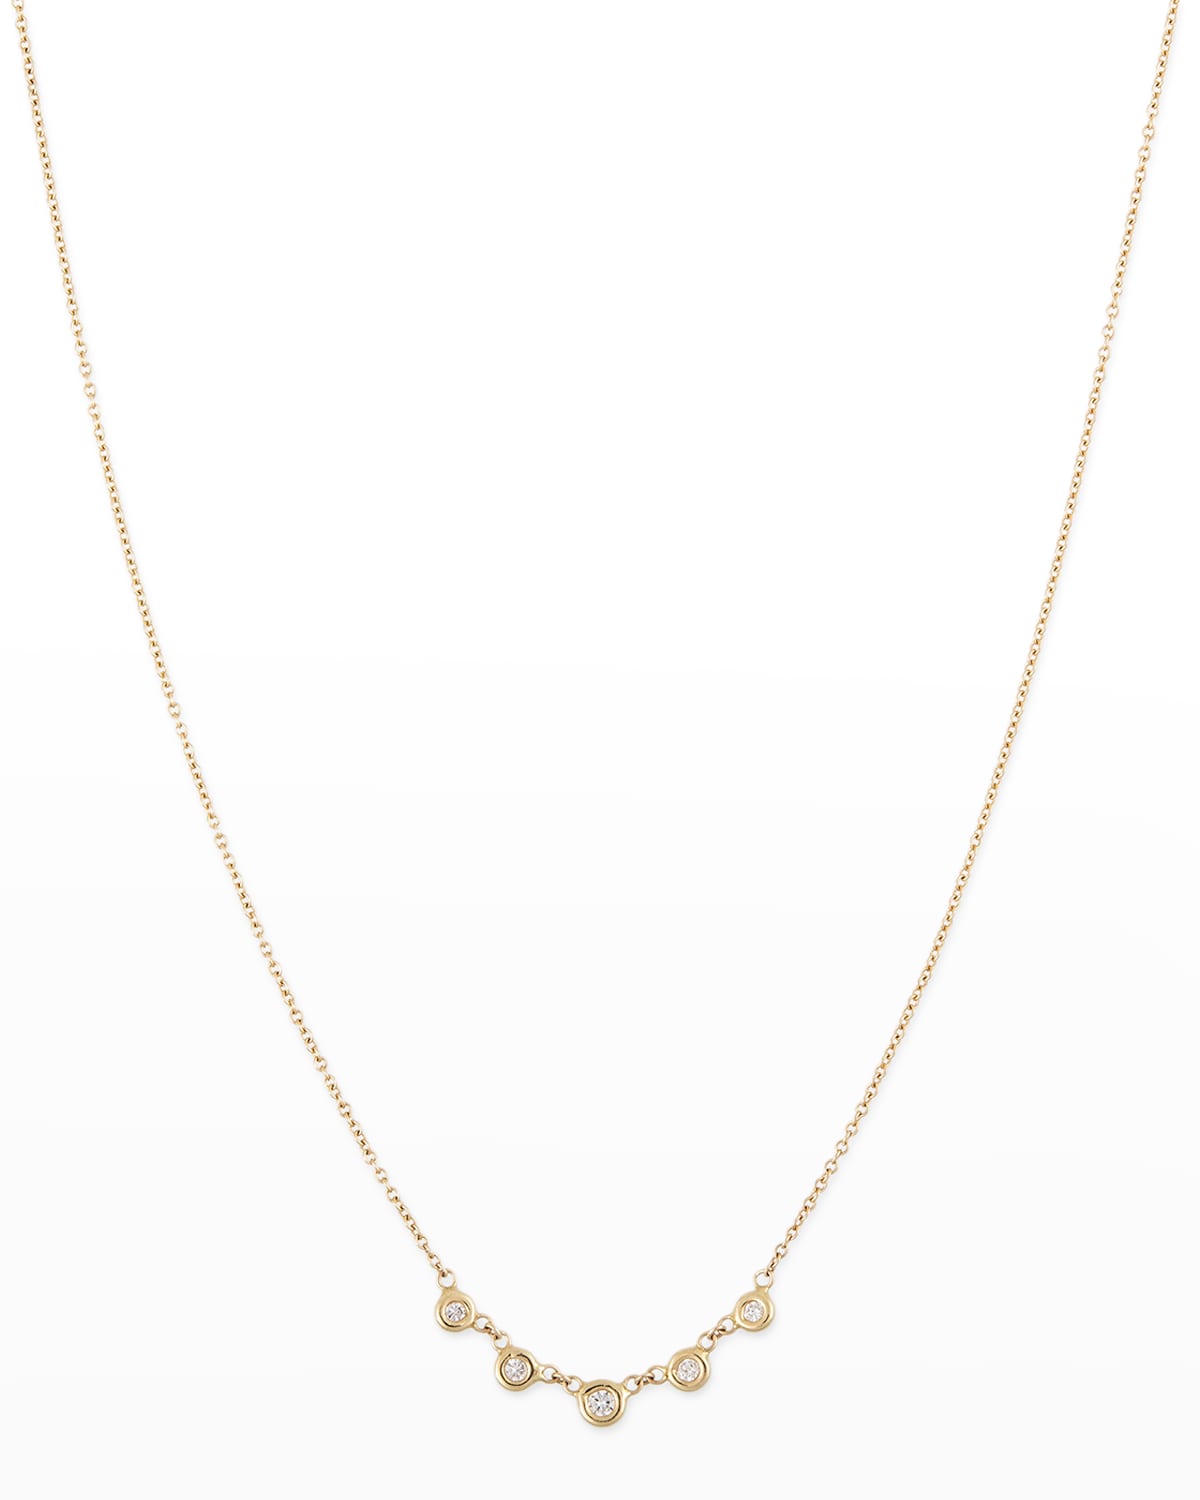 Jacquie Aiche Yellow Gold 5-diamond Emily Necklace